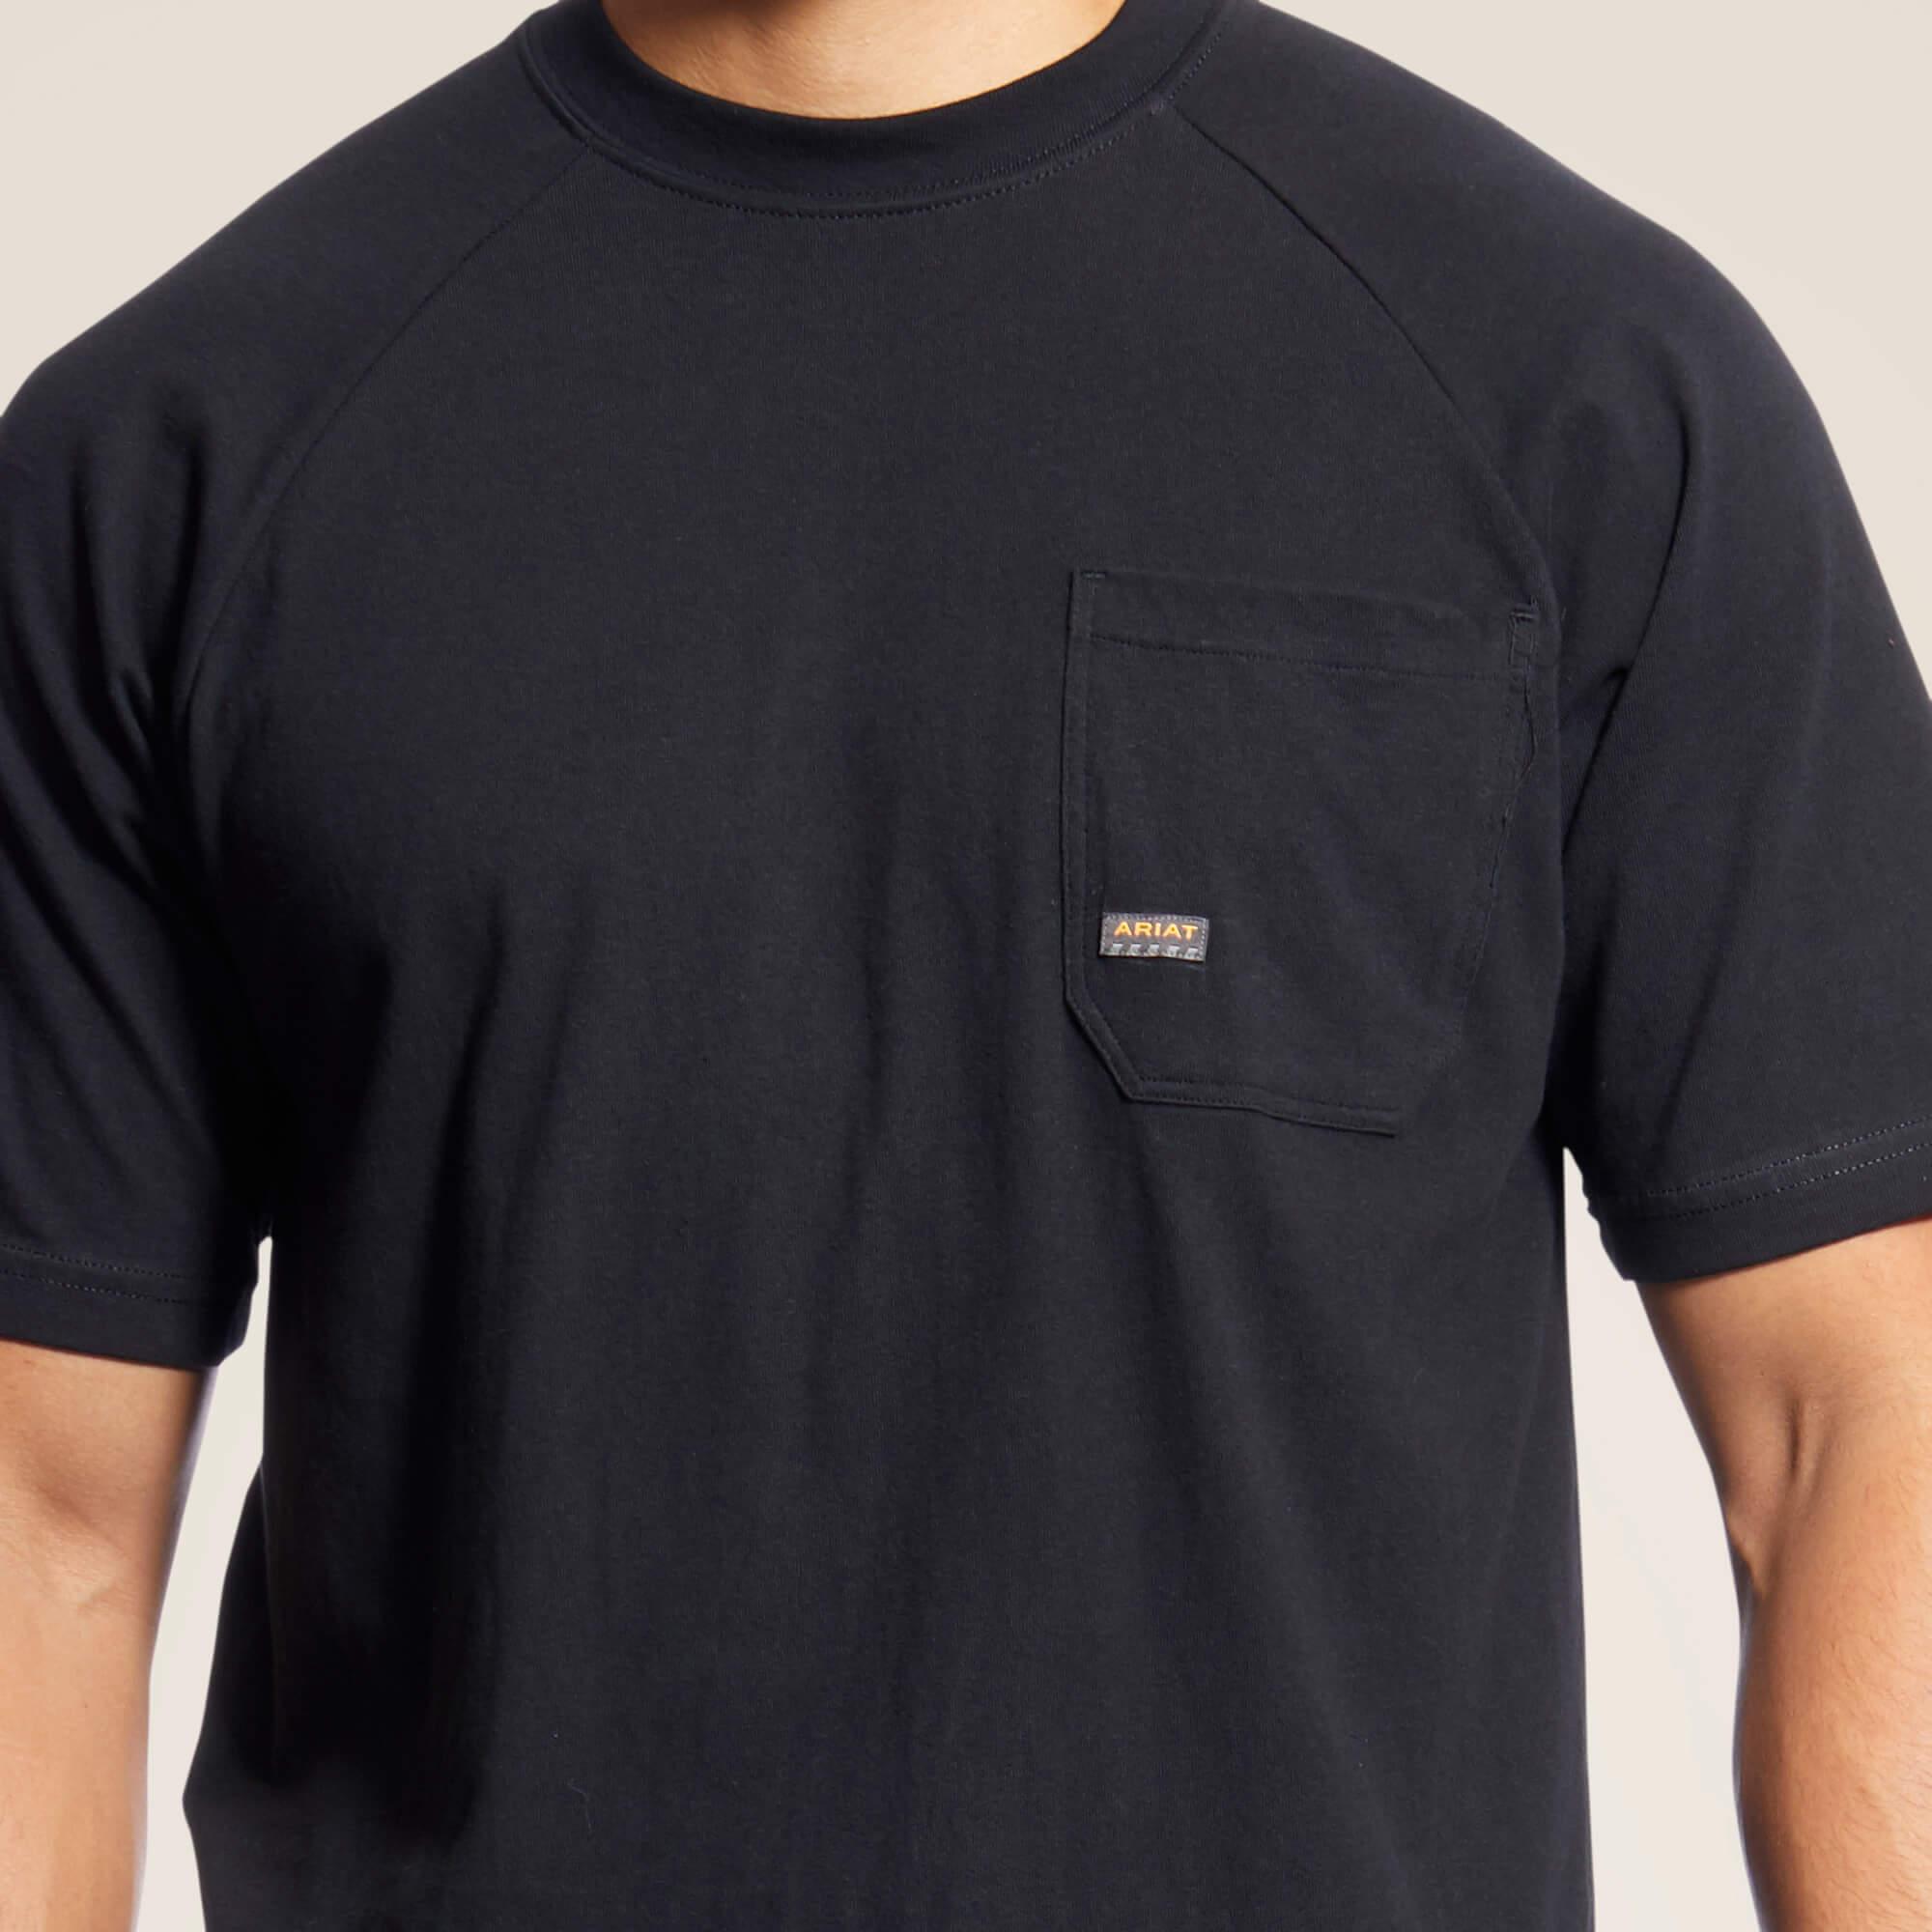 Rebar Cotton Strong T-Shirt - Black - Purpose-Built / Home of the Trades